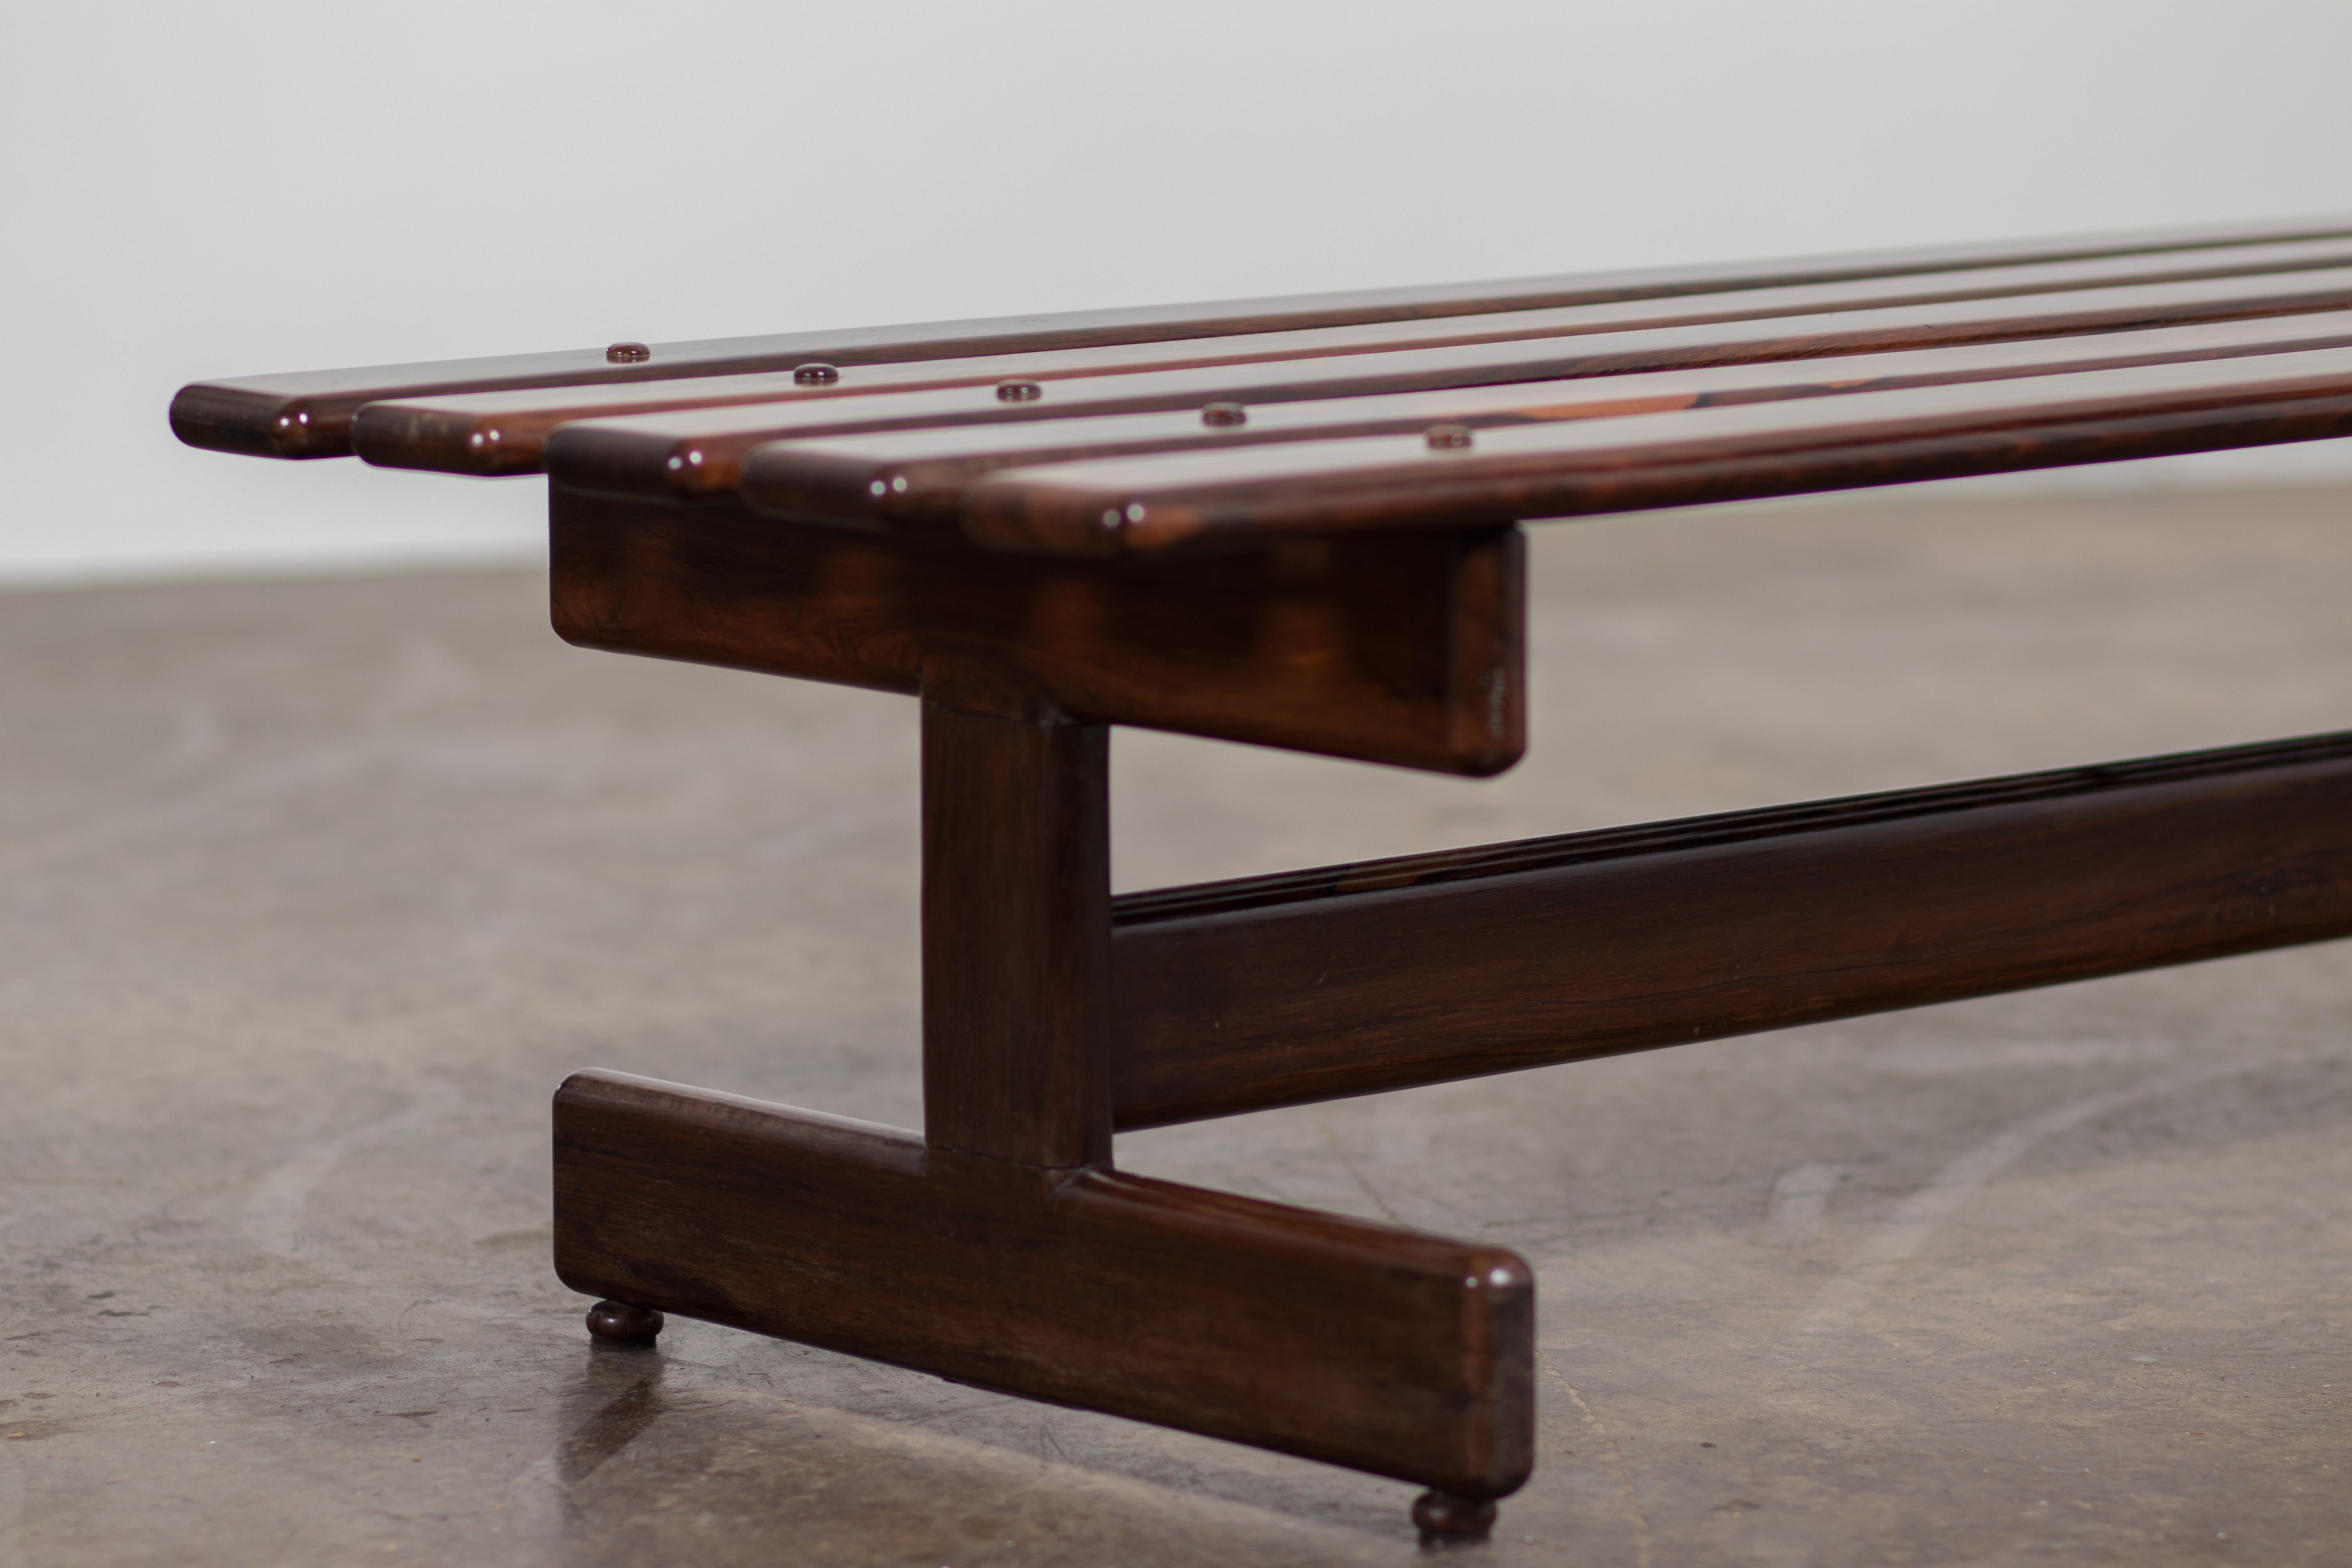 Vintage Rosewood Slatted Bench by Cantu Moveis, 1960s, Midcentury Brazilian In Good Condition For Sale In New York, NY